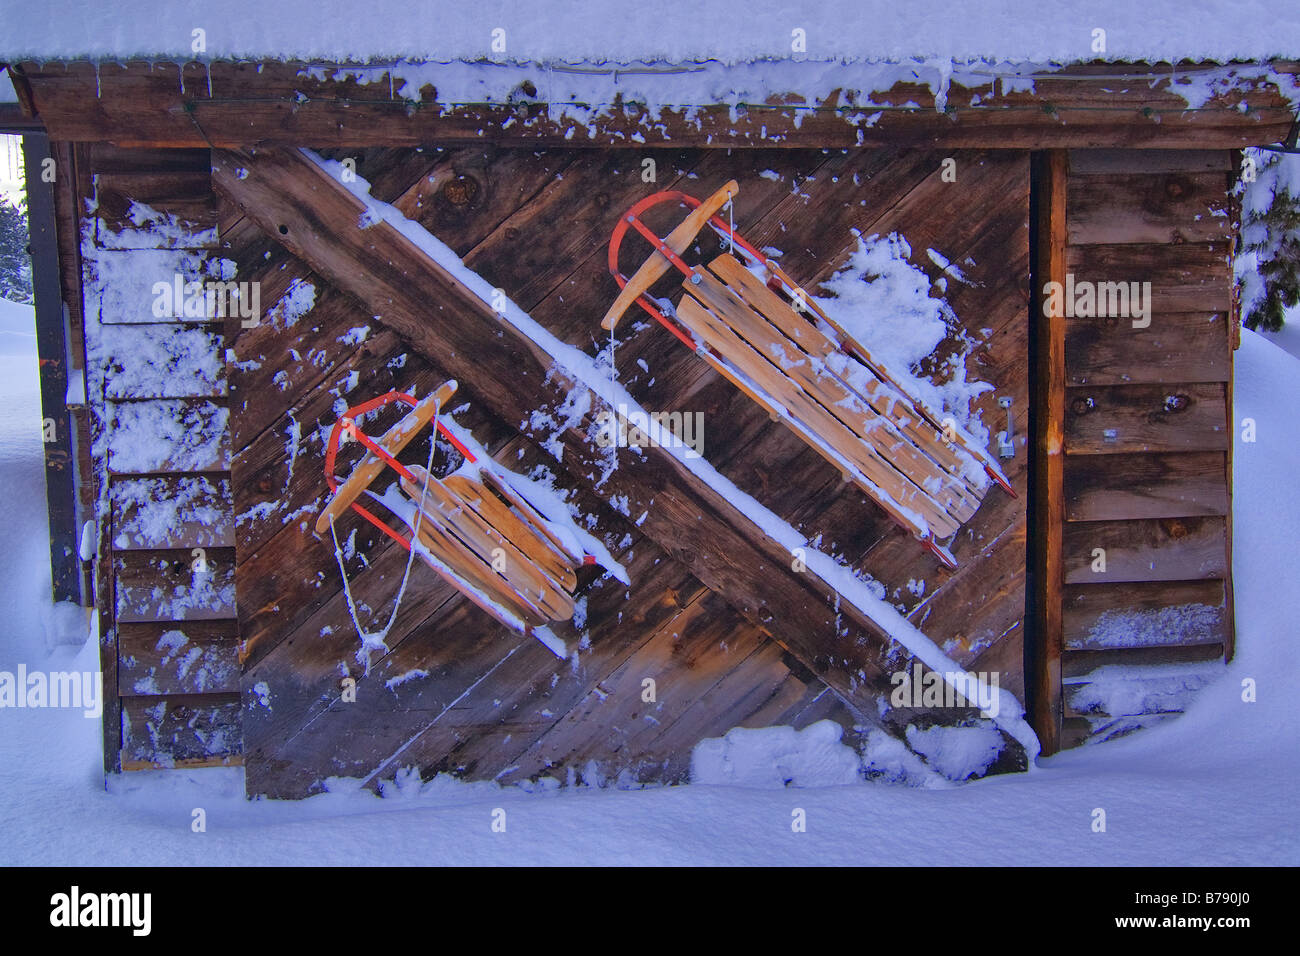 Two sleds attached to the side of a shed at the Cottonwood restaurant in Truckee in California Stock Photo